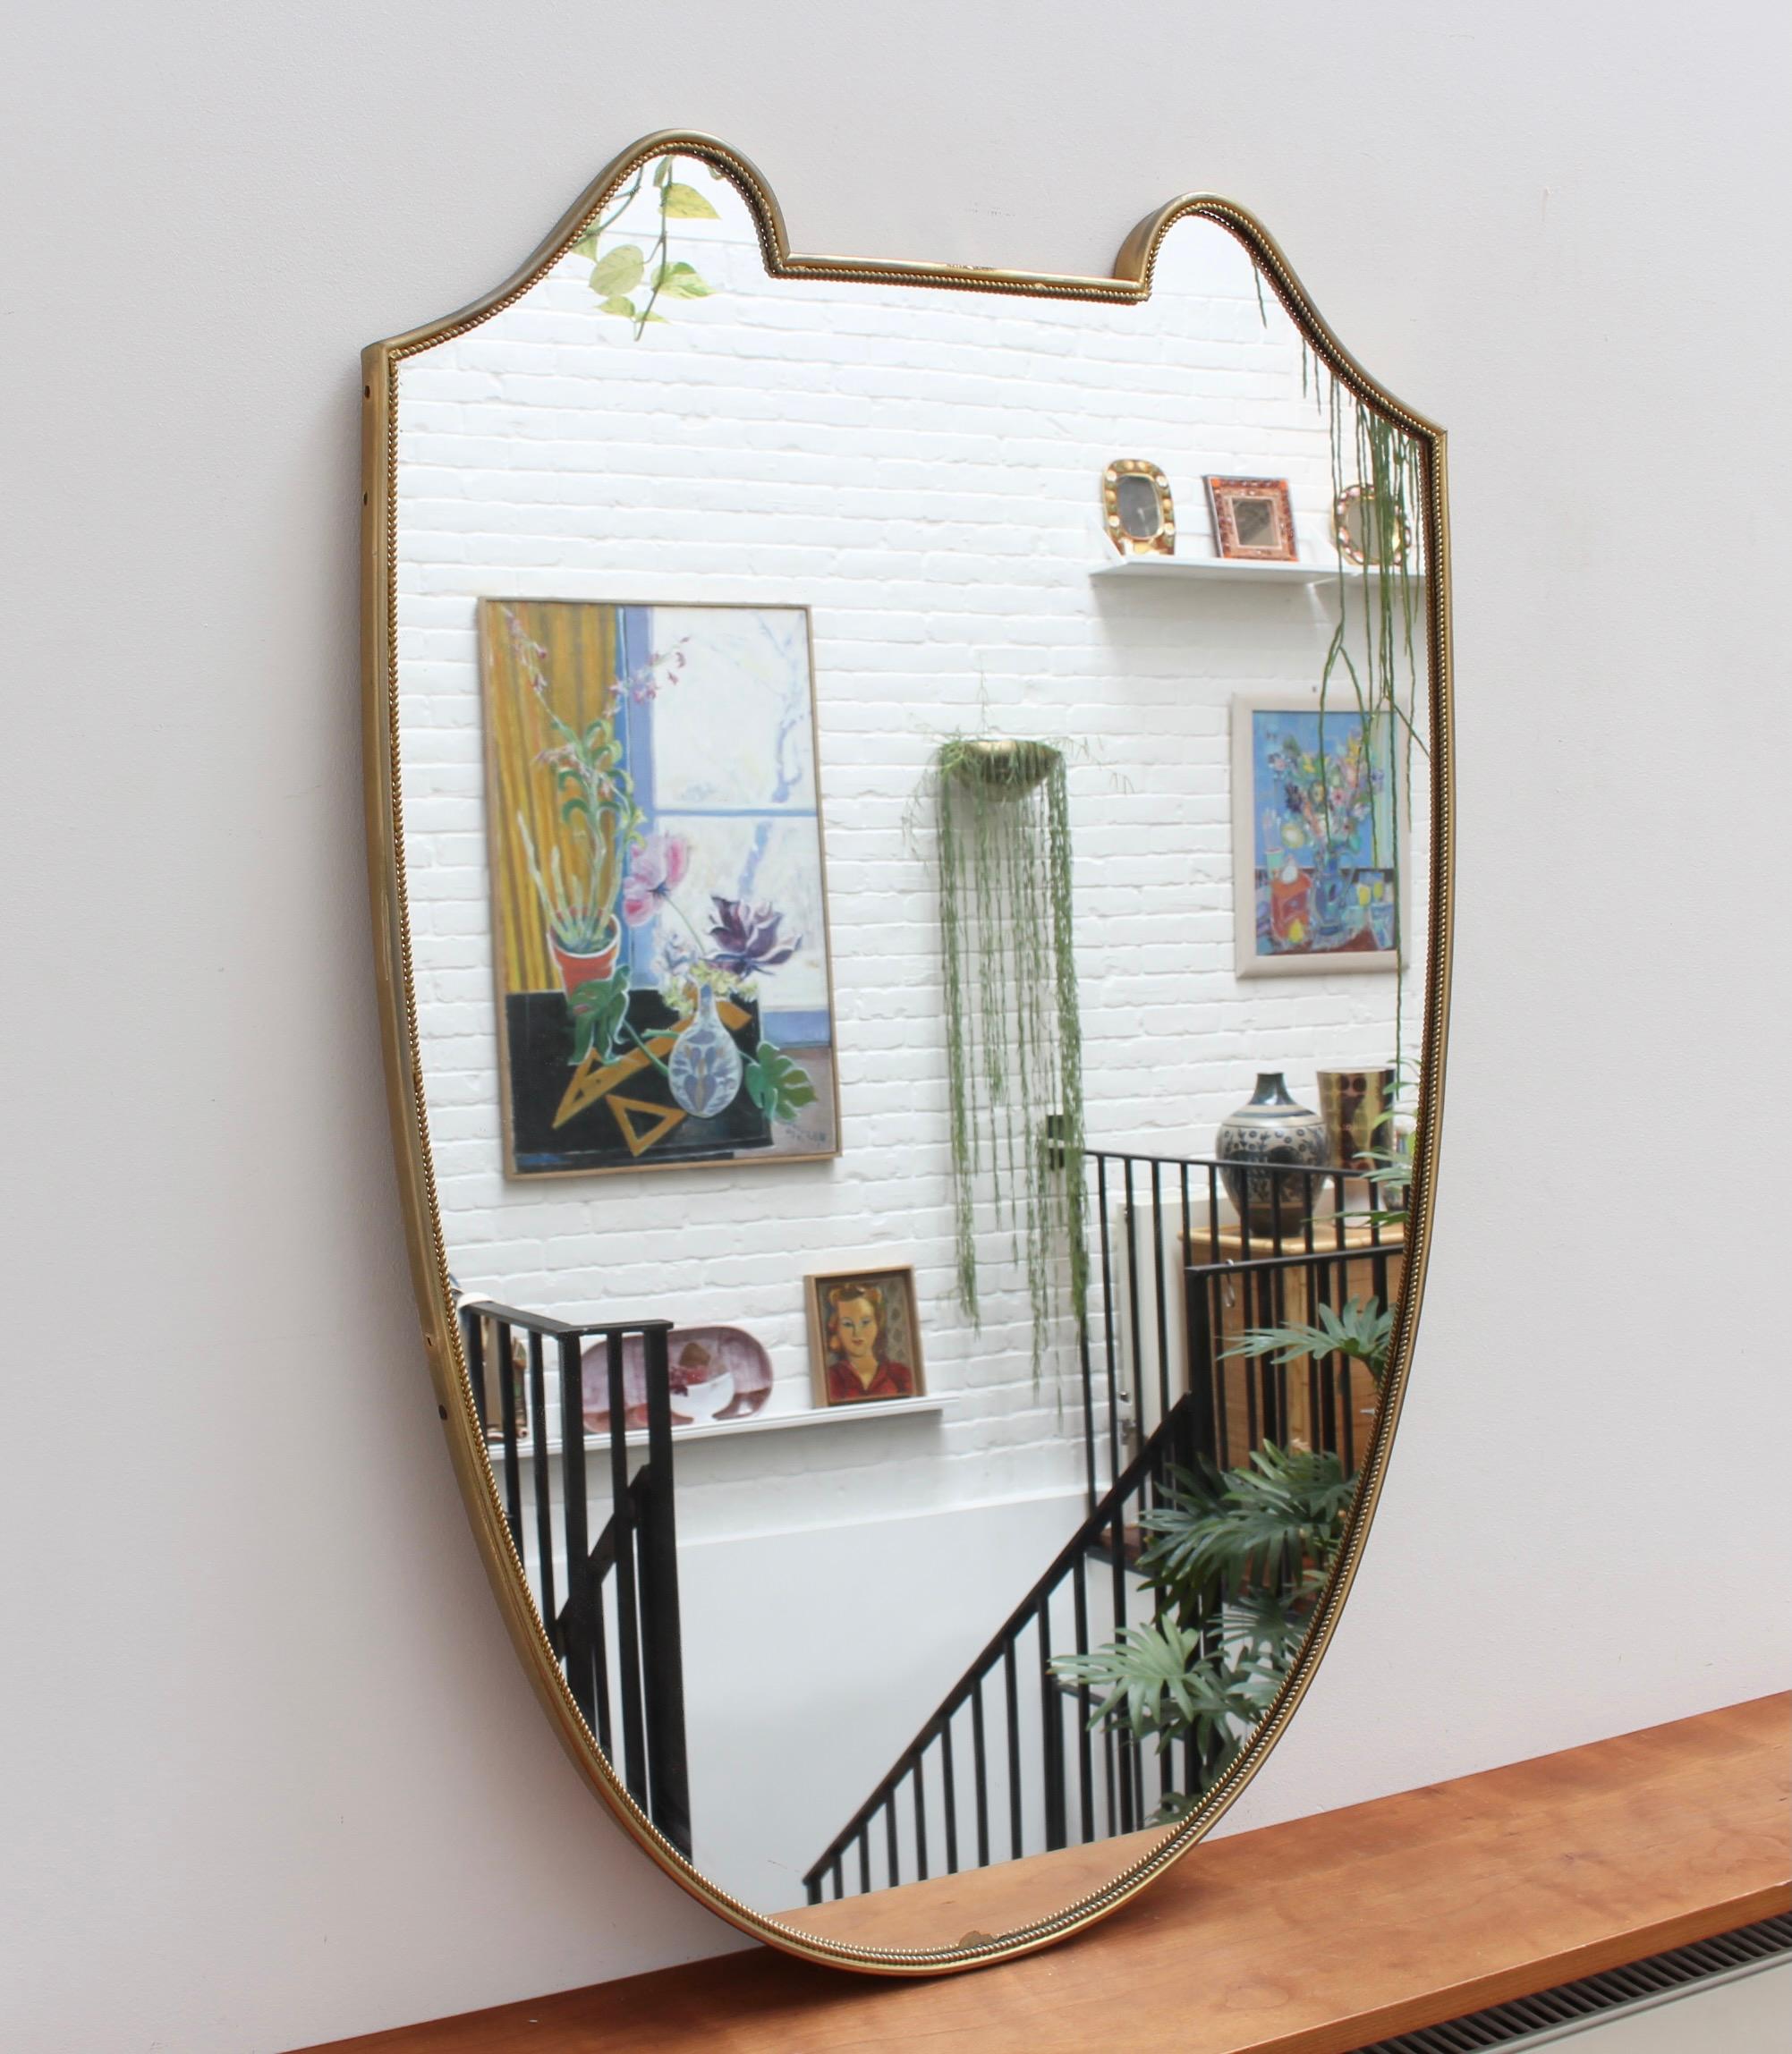 Mid-Century Italian wall mirror with brass frame, circa 1950s. This mirror is substantial, solid and at once elegant. It is the Sophia Lauren of vintage mirrors with its incredible looks, charming personality and characterful beauty mark that others